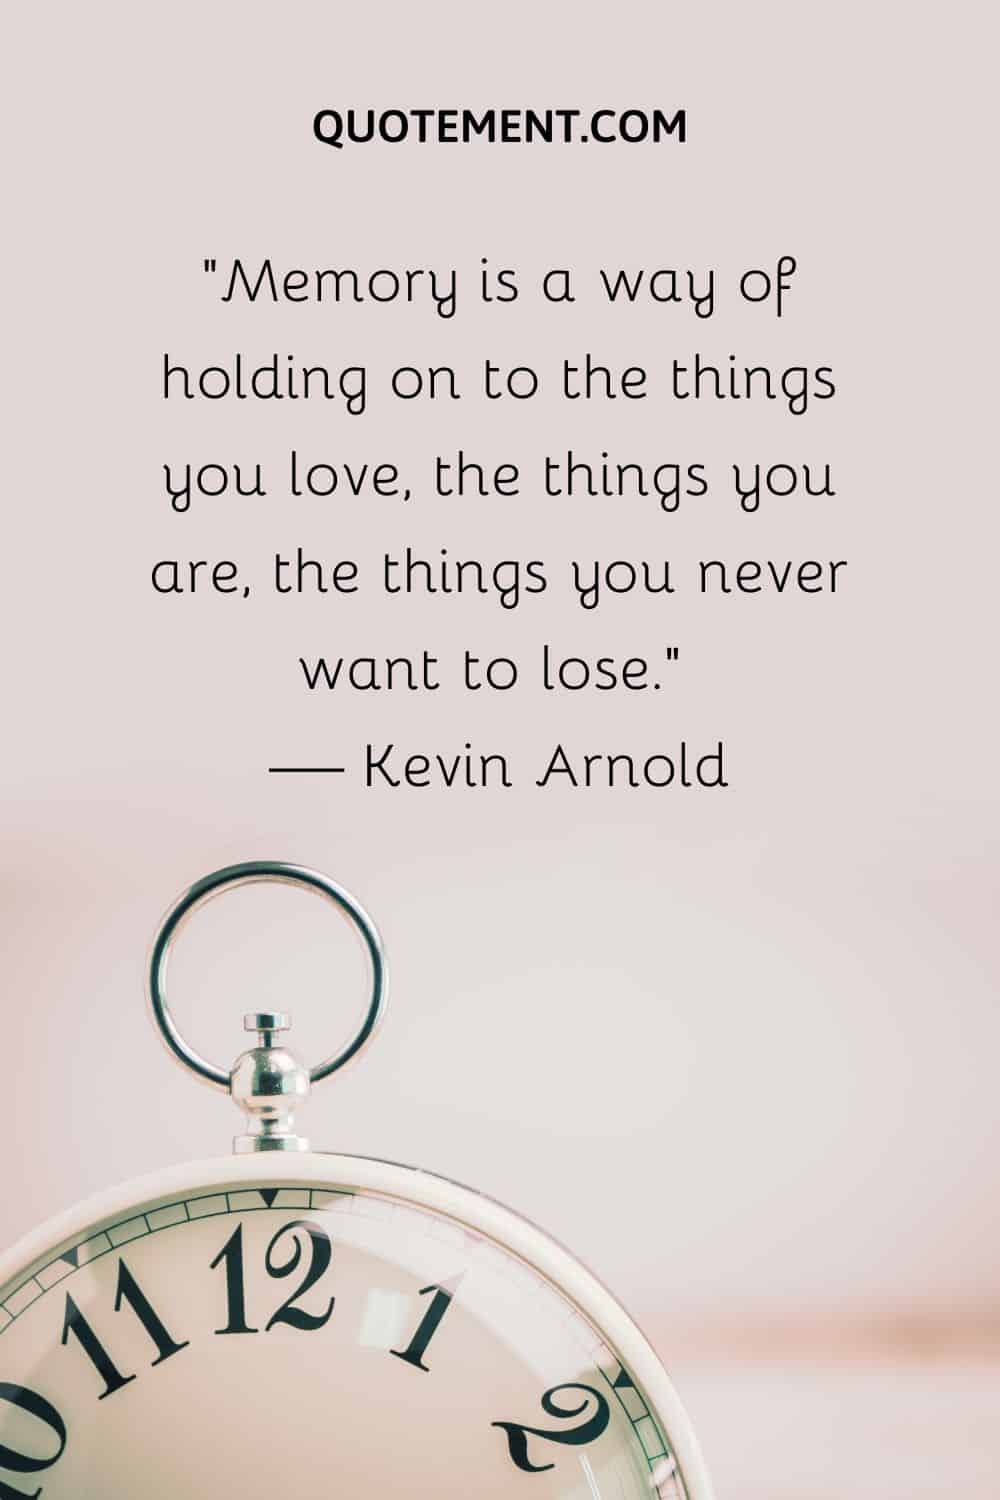 Memory is a way of holding on to the things you love